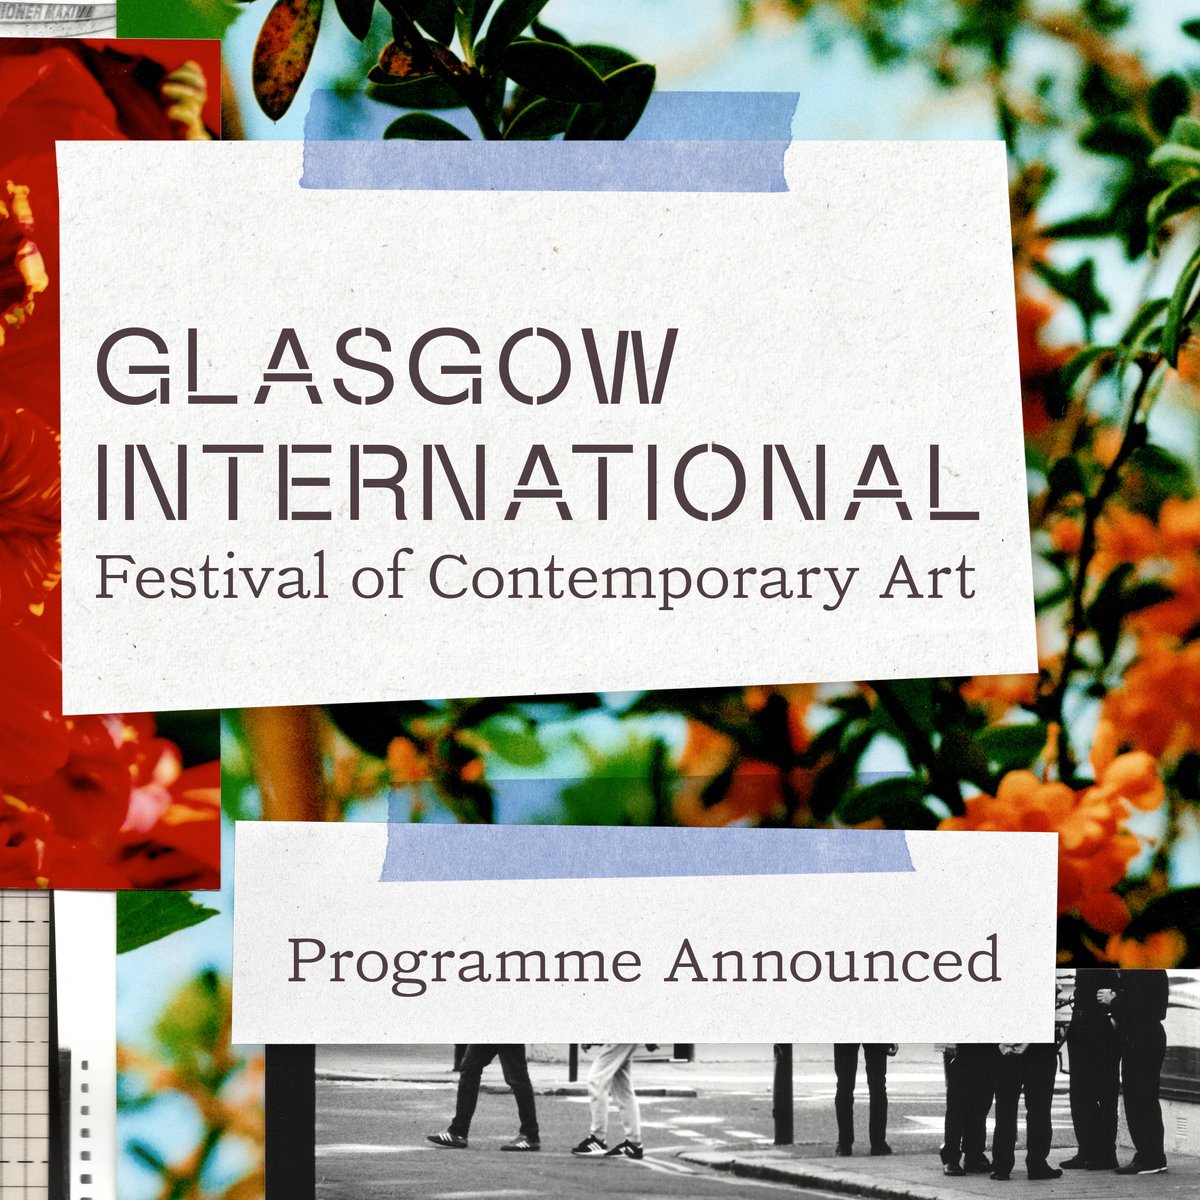 Glasgow International, Scotland's biennial festival of contemporary art, have today launched their full programme, taking place across the city (including in GoMA) and online between 7 - 23 June. Explore now: glasgowinternational.org